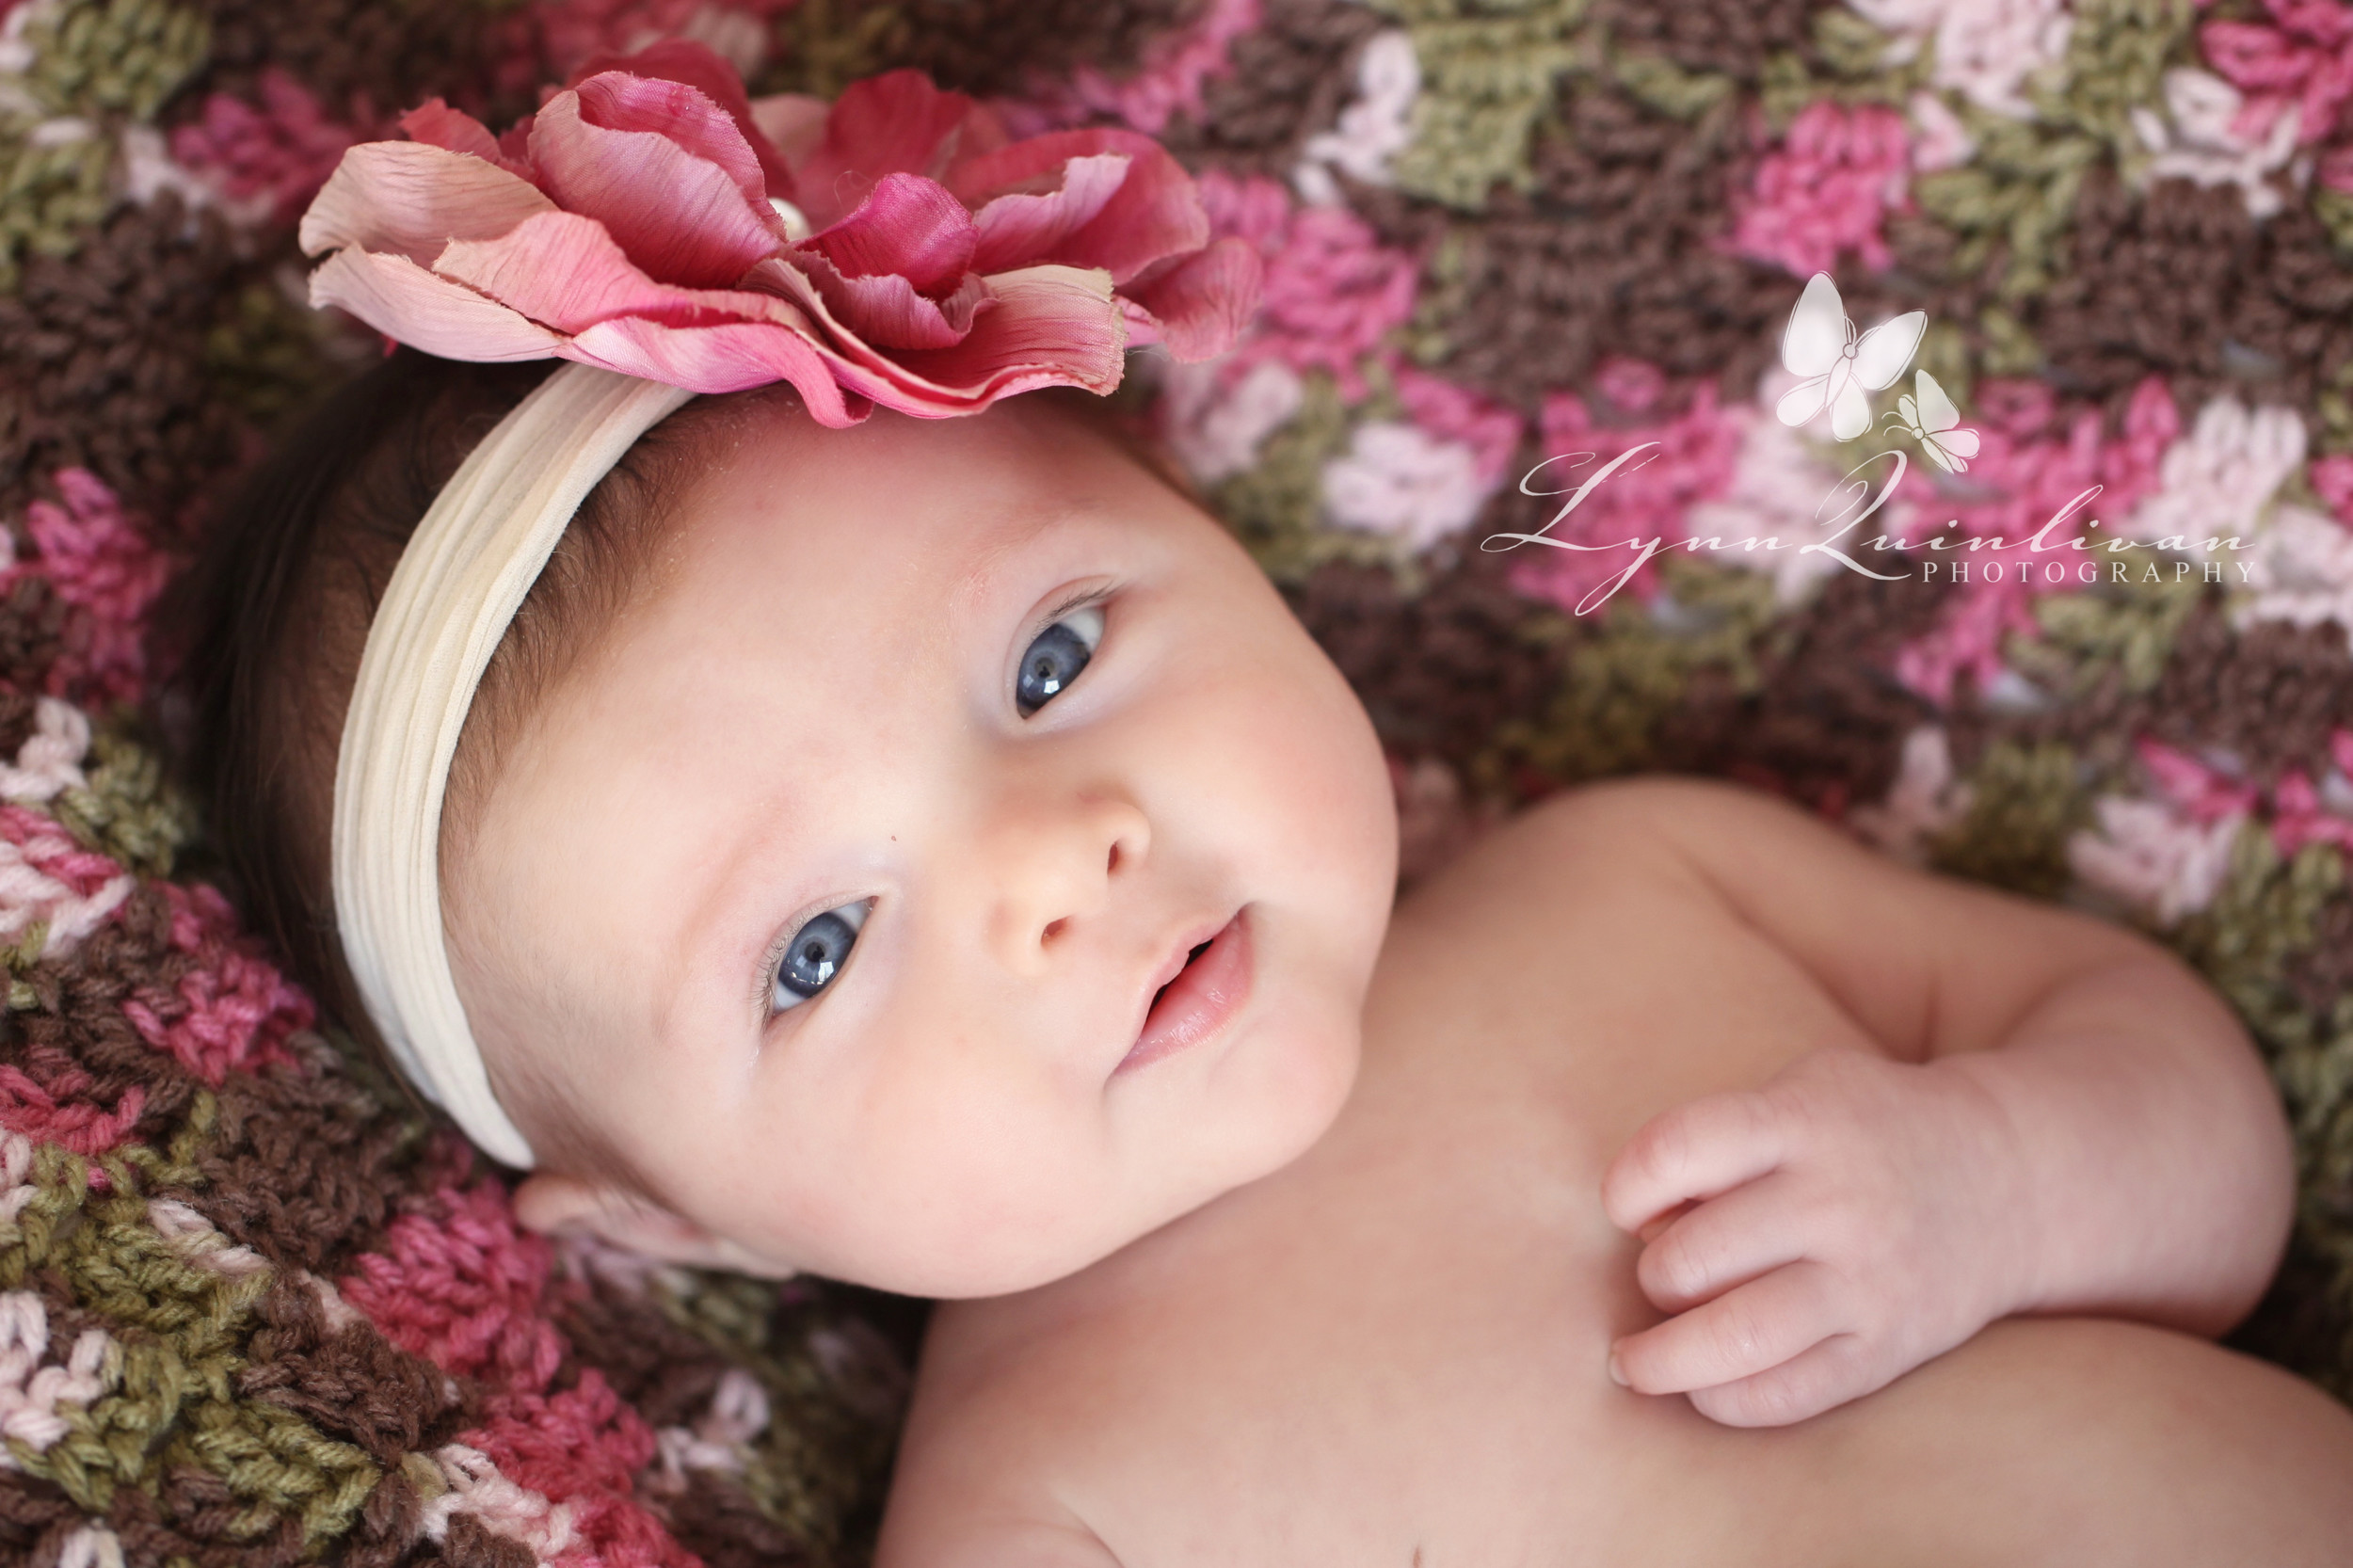 2500x1666 Picture of cute babies girls for Wallpaper Â· Newborn Baby ...